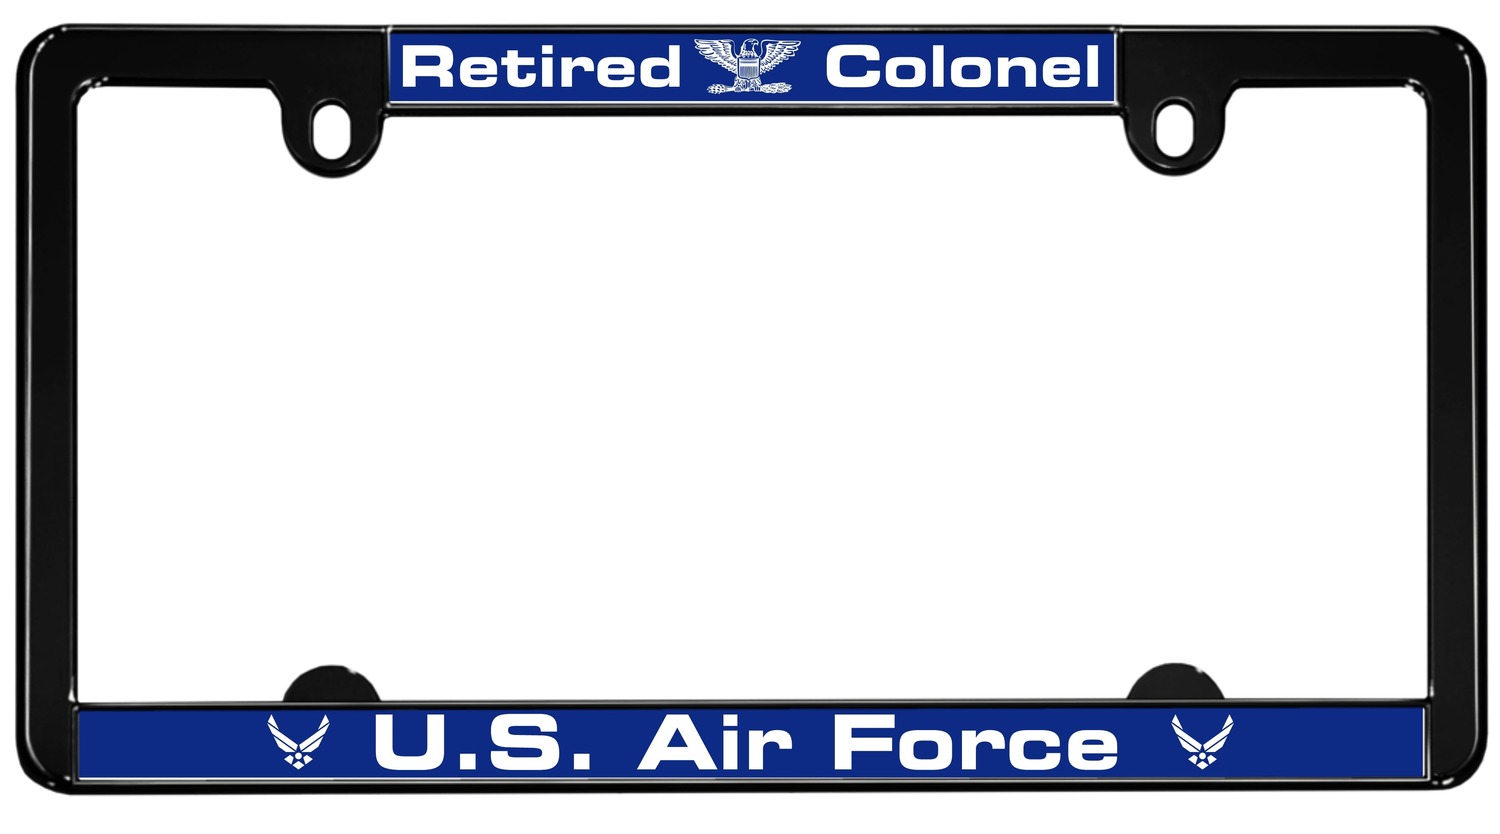 Retired Colonel - Custom metal ALL States license plate frame with clear polyurethane doming resin